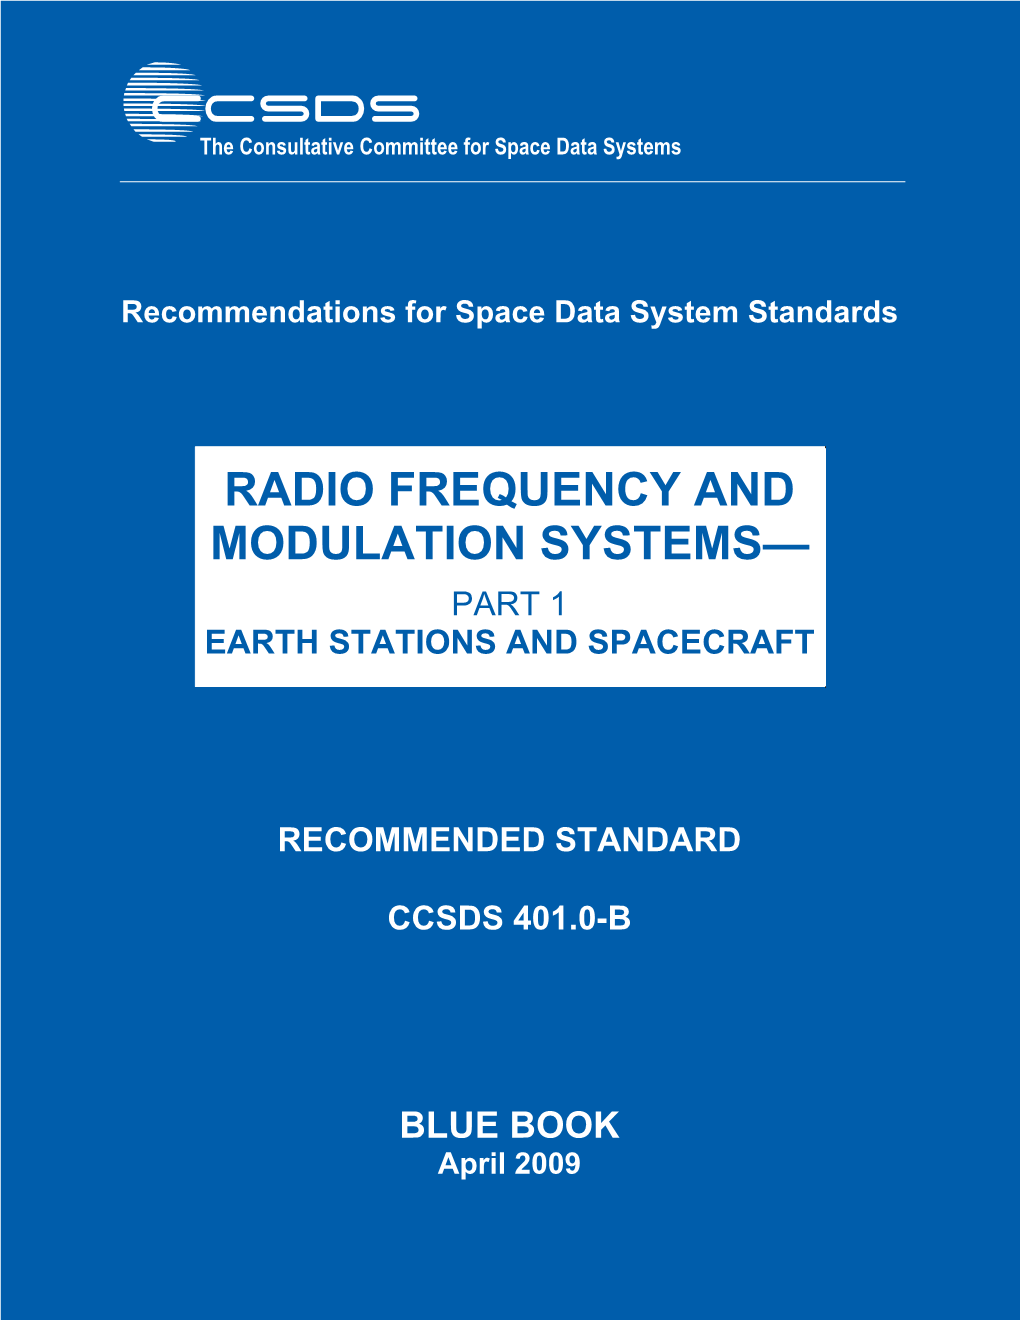 Radio Frequency and Modulation Systems— Part 1 Earth Stations and Spacecraft